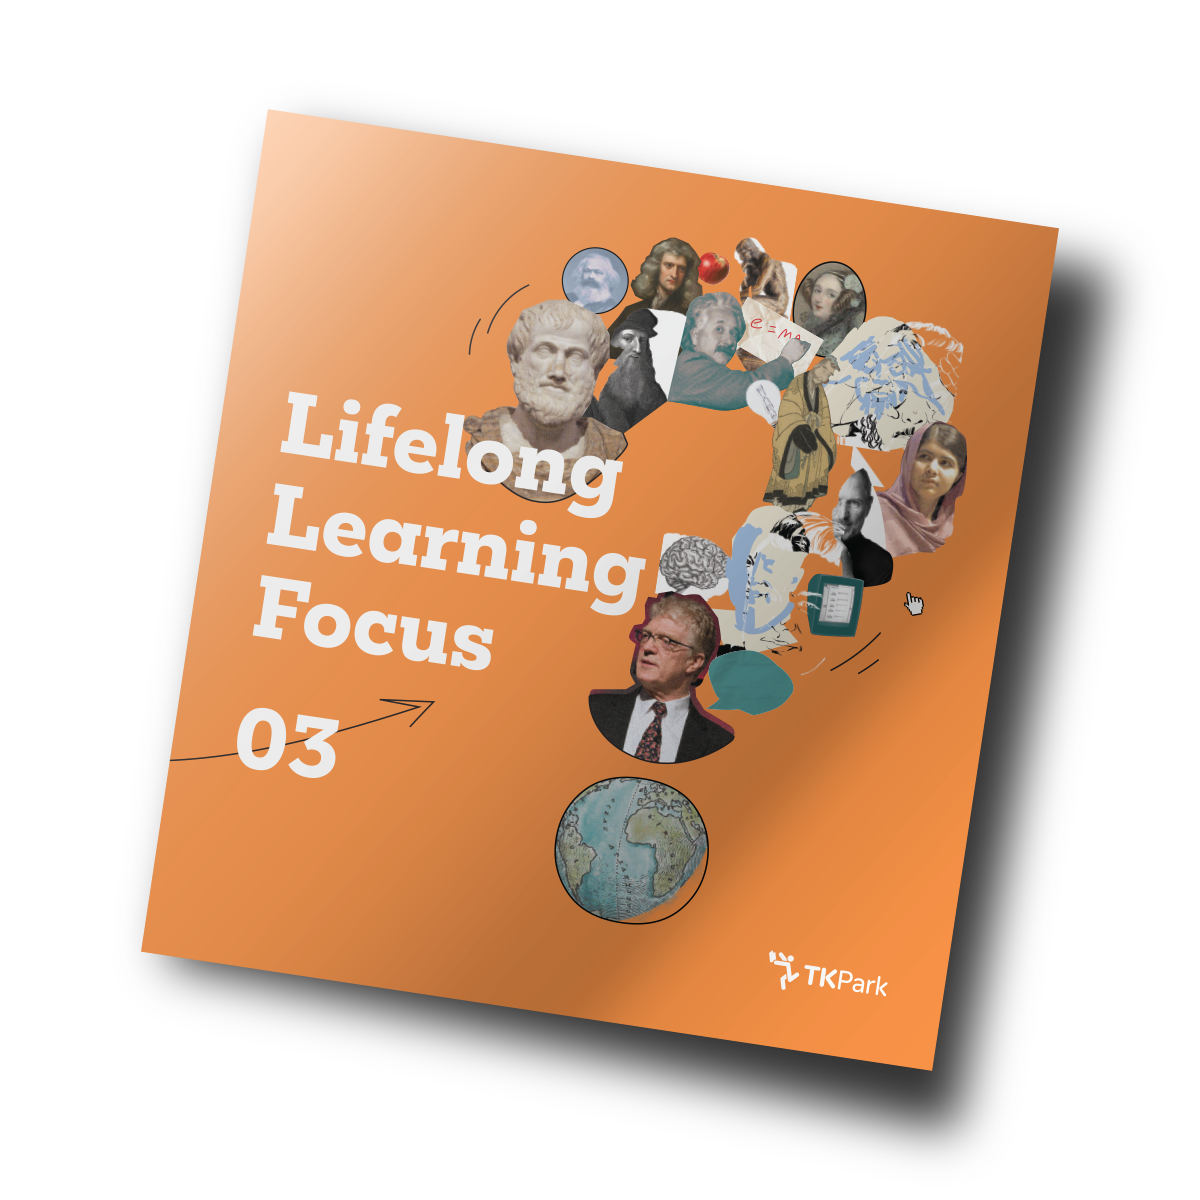 Lifelong Learning Focus issue 03